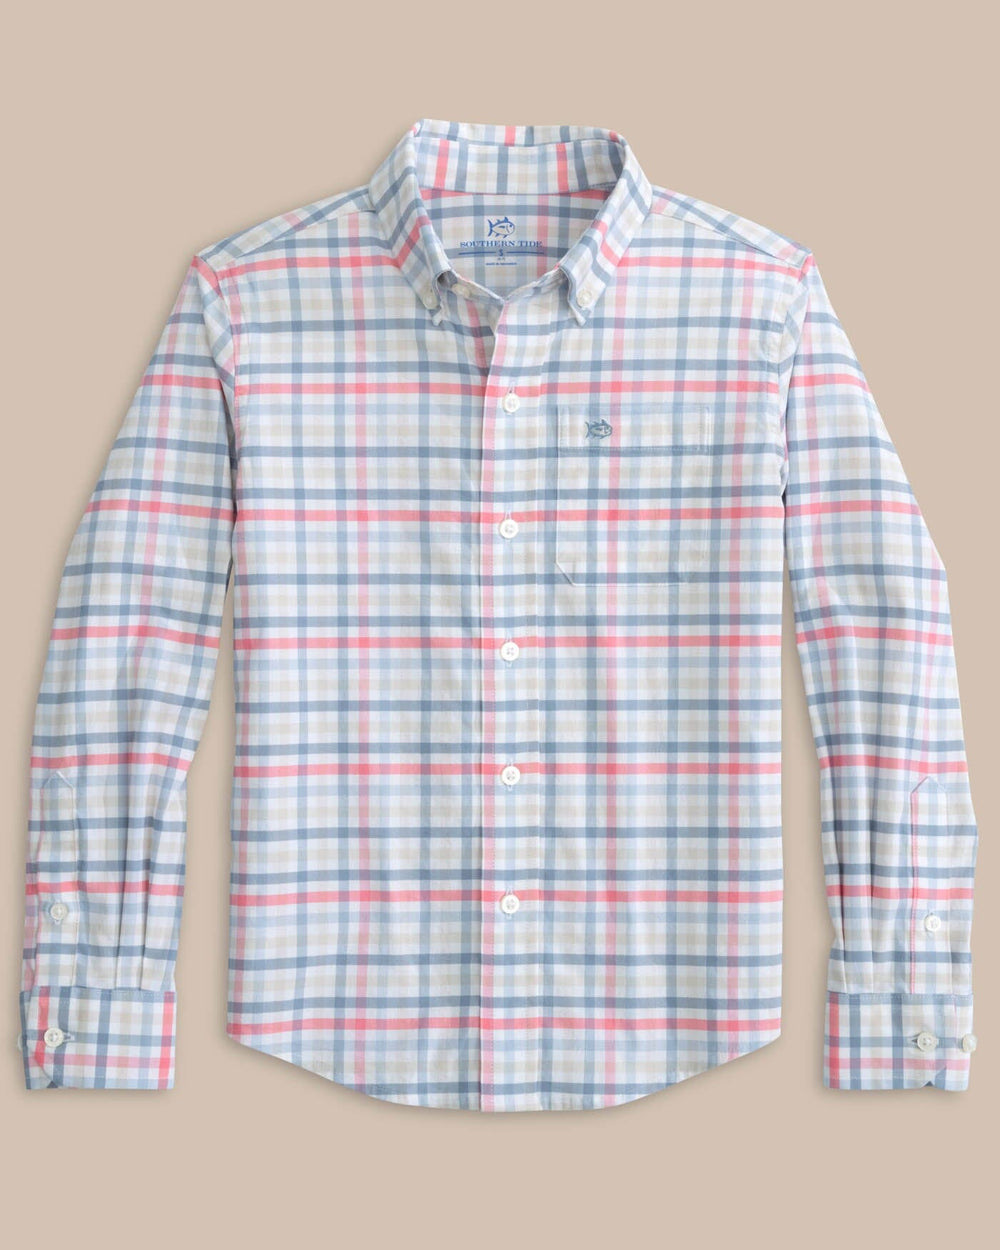 The front view of the Southern Tide youth-coastal-passage-pelham-plaid-long-sleeve-sportshirt by Southern Tide - Geranium Pink